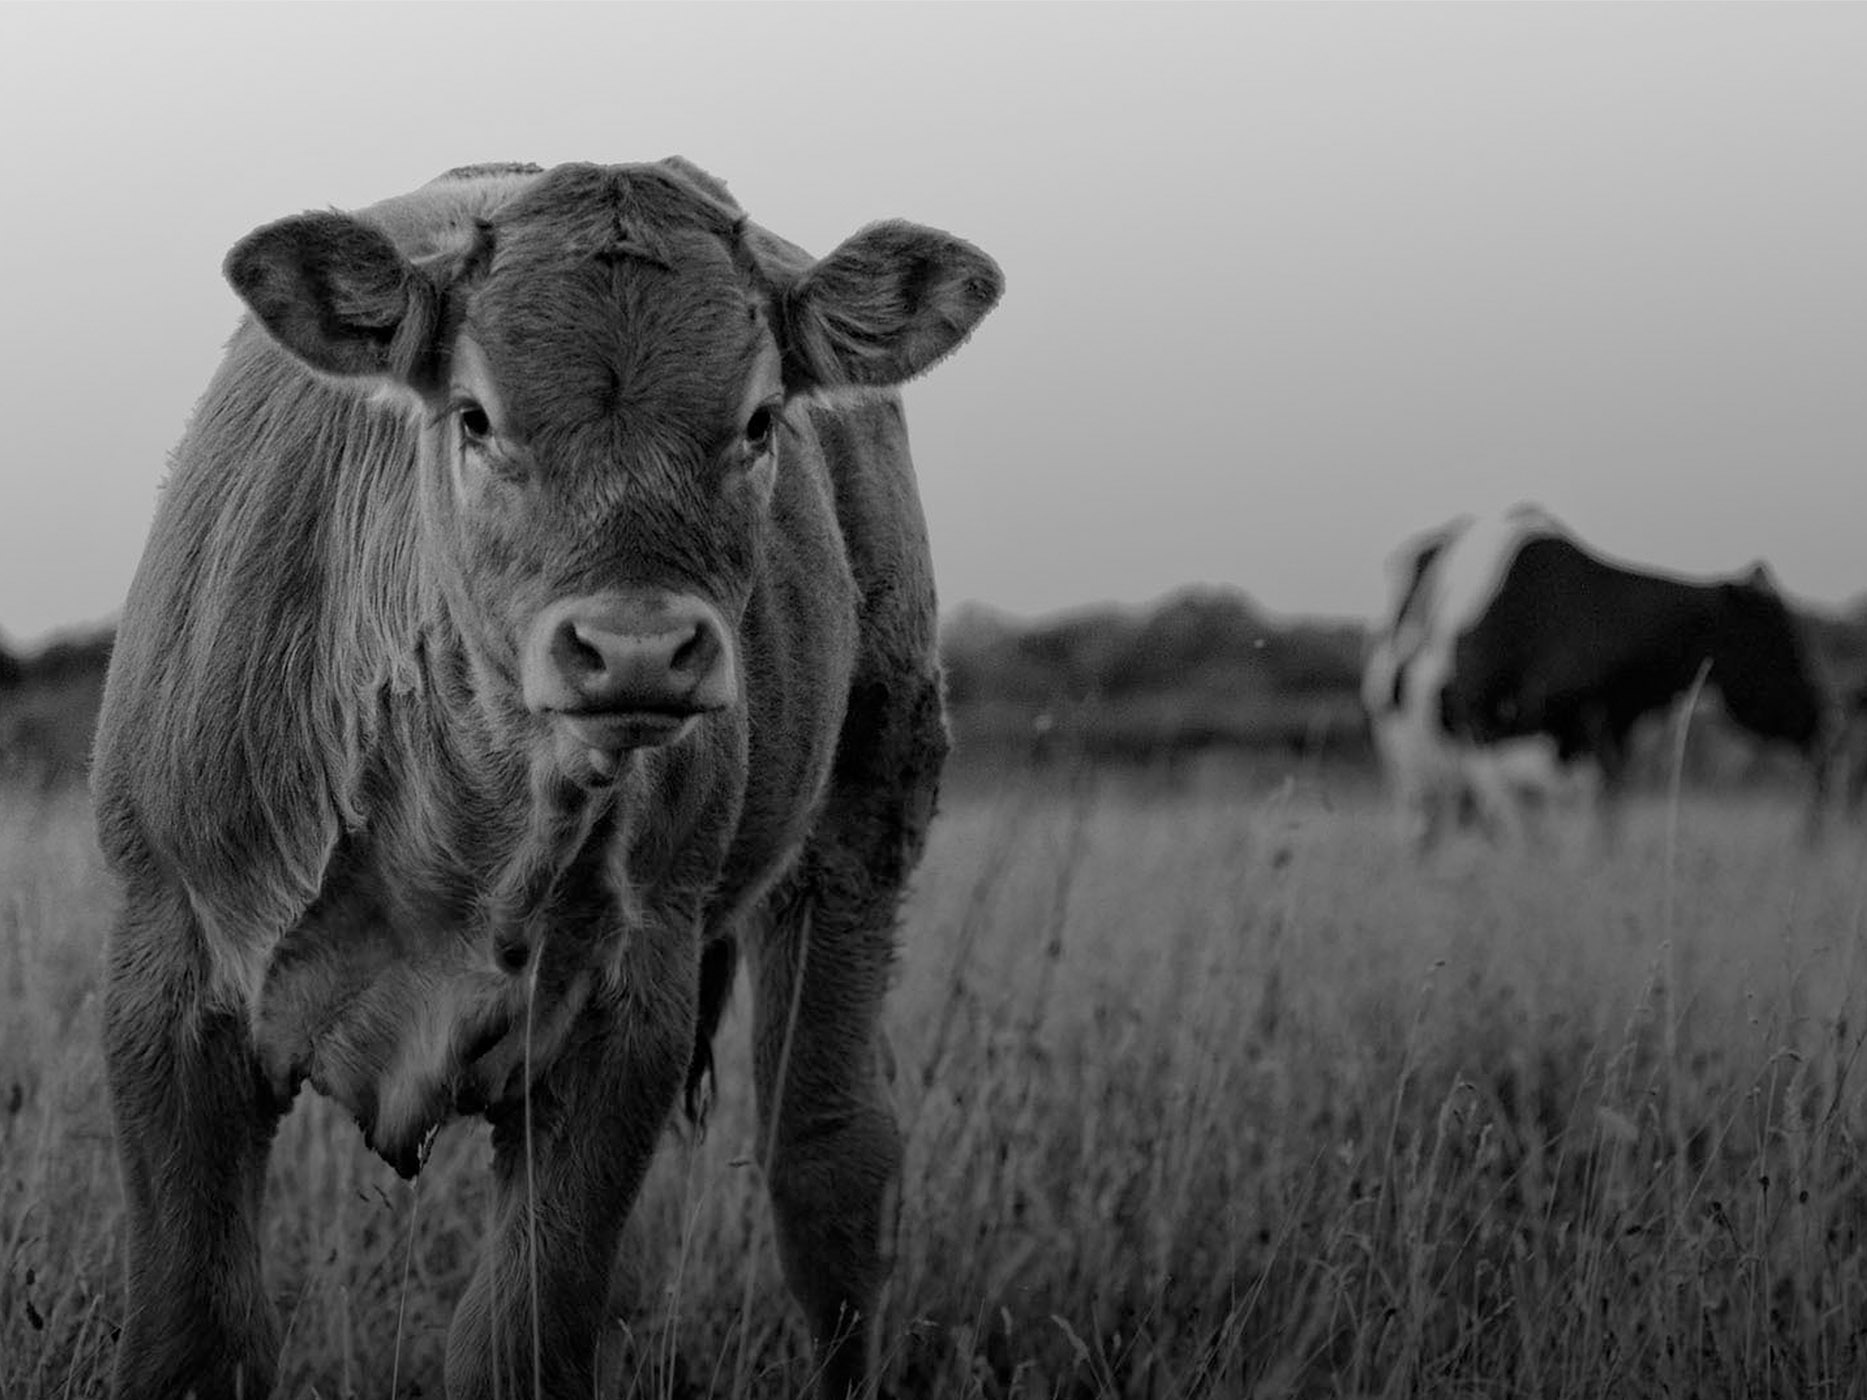 Black and white image of a cow